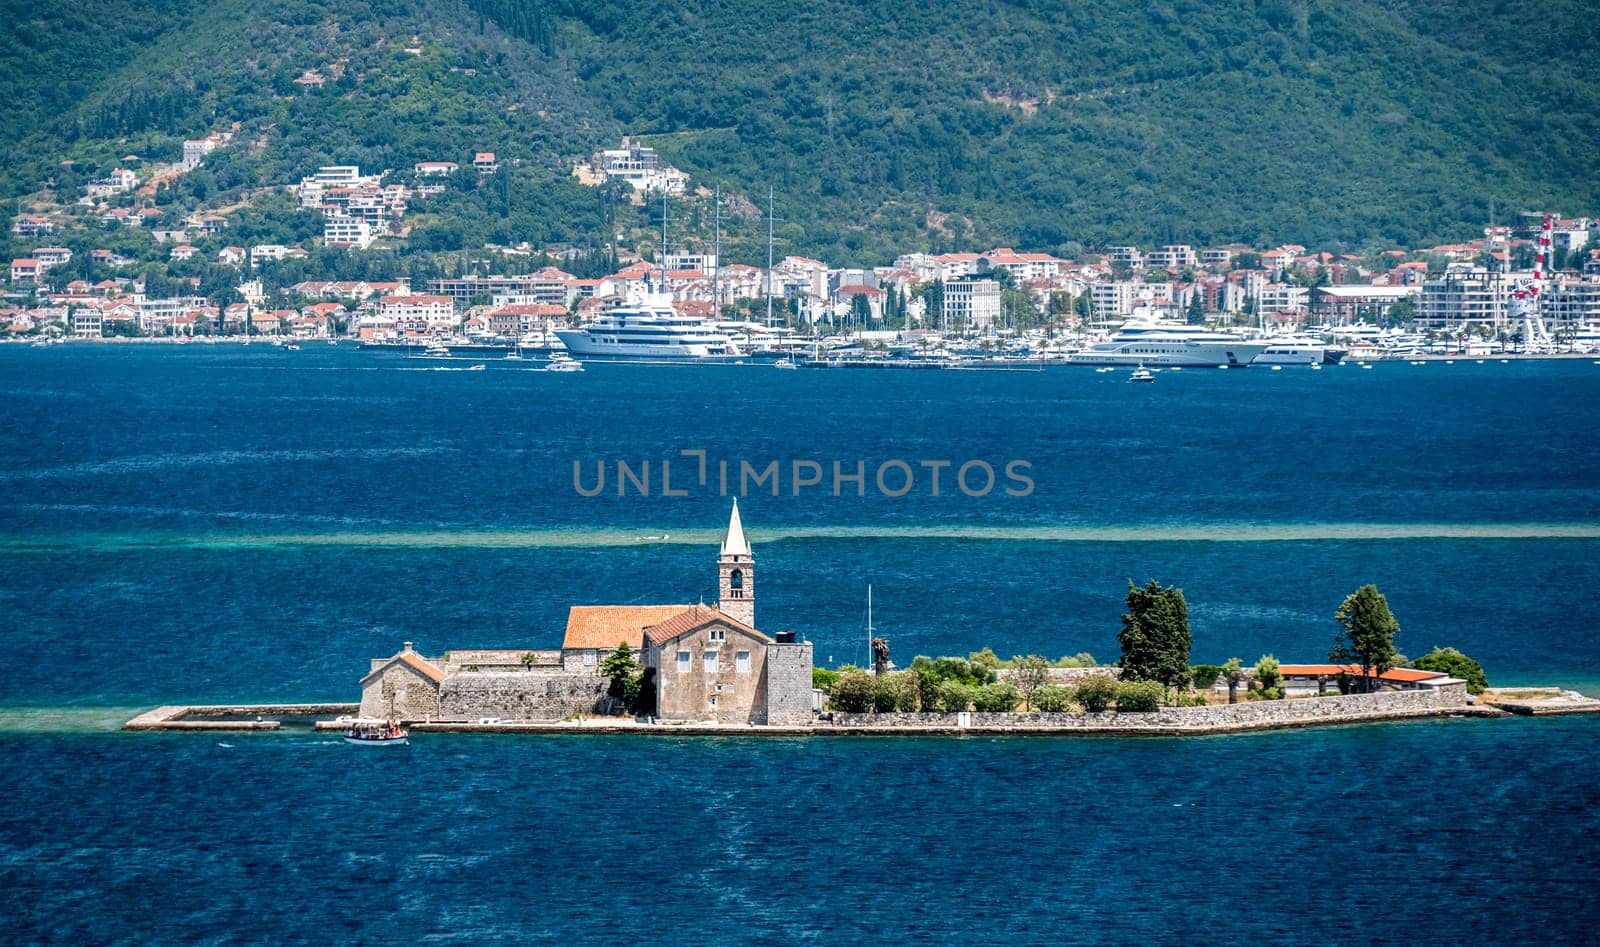 Island Lady of the rocks in Montenegro, Adriatic sea view. Amazing Mediterranean architecture and nature